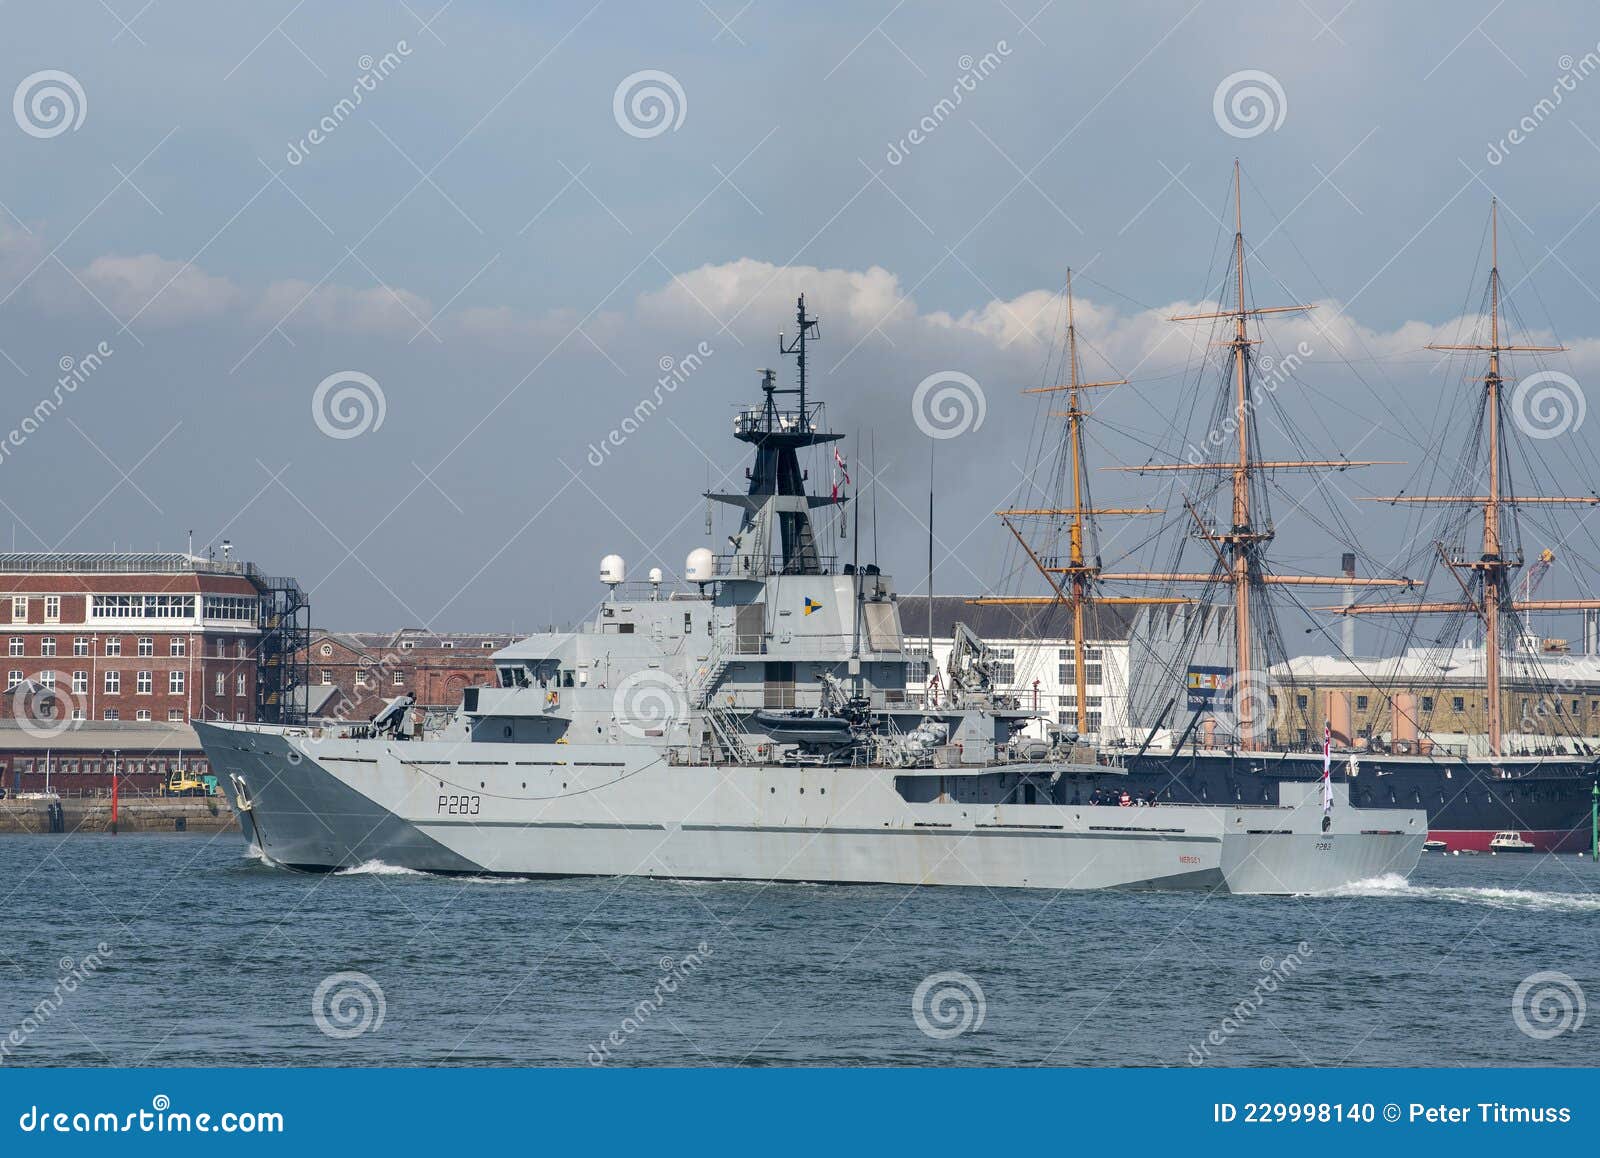 HMS Mersey Fishing Protection Vessel, Portsmouth, UK Editorial Image -  Image of portsmouth, sailing: 229998140